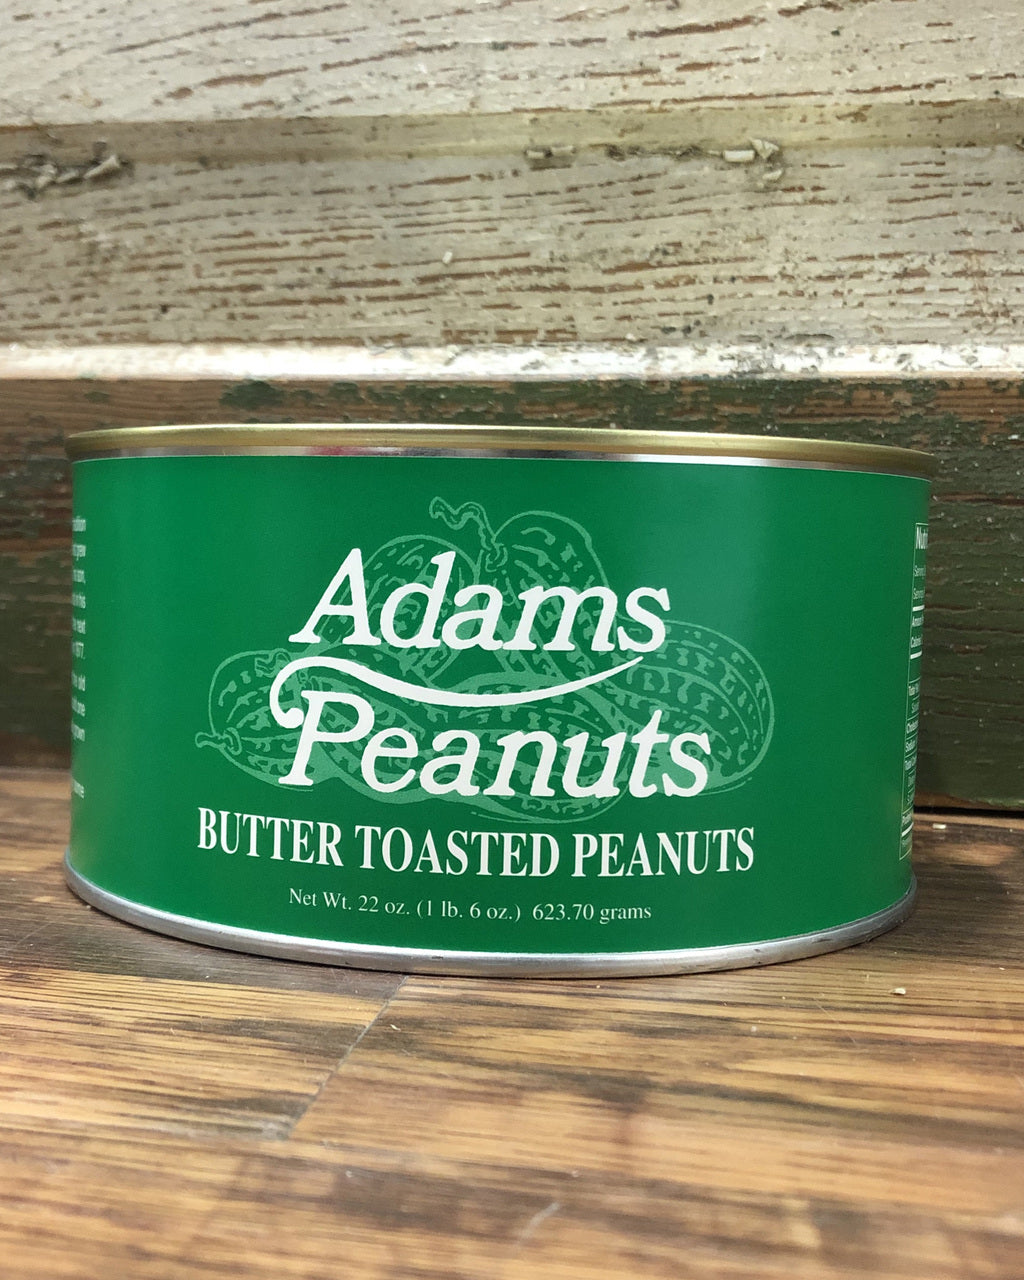 Butter Toasted Peanuts